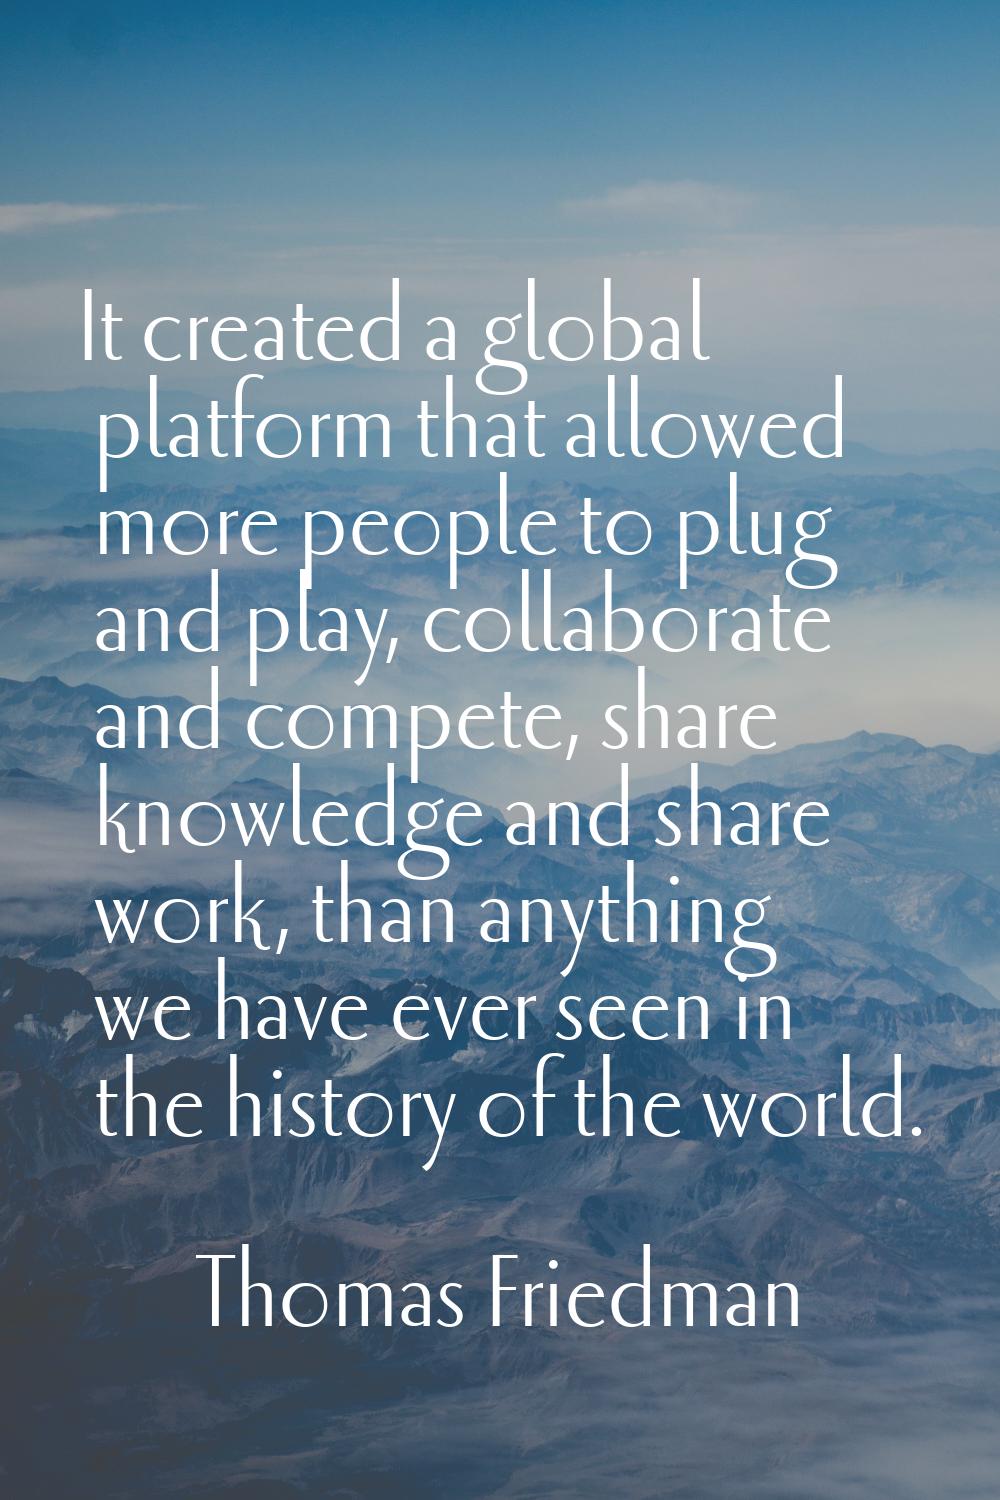 It created a global platform that allowed more people to plug and play, collaborate and compete, sh